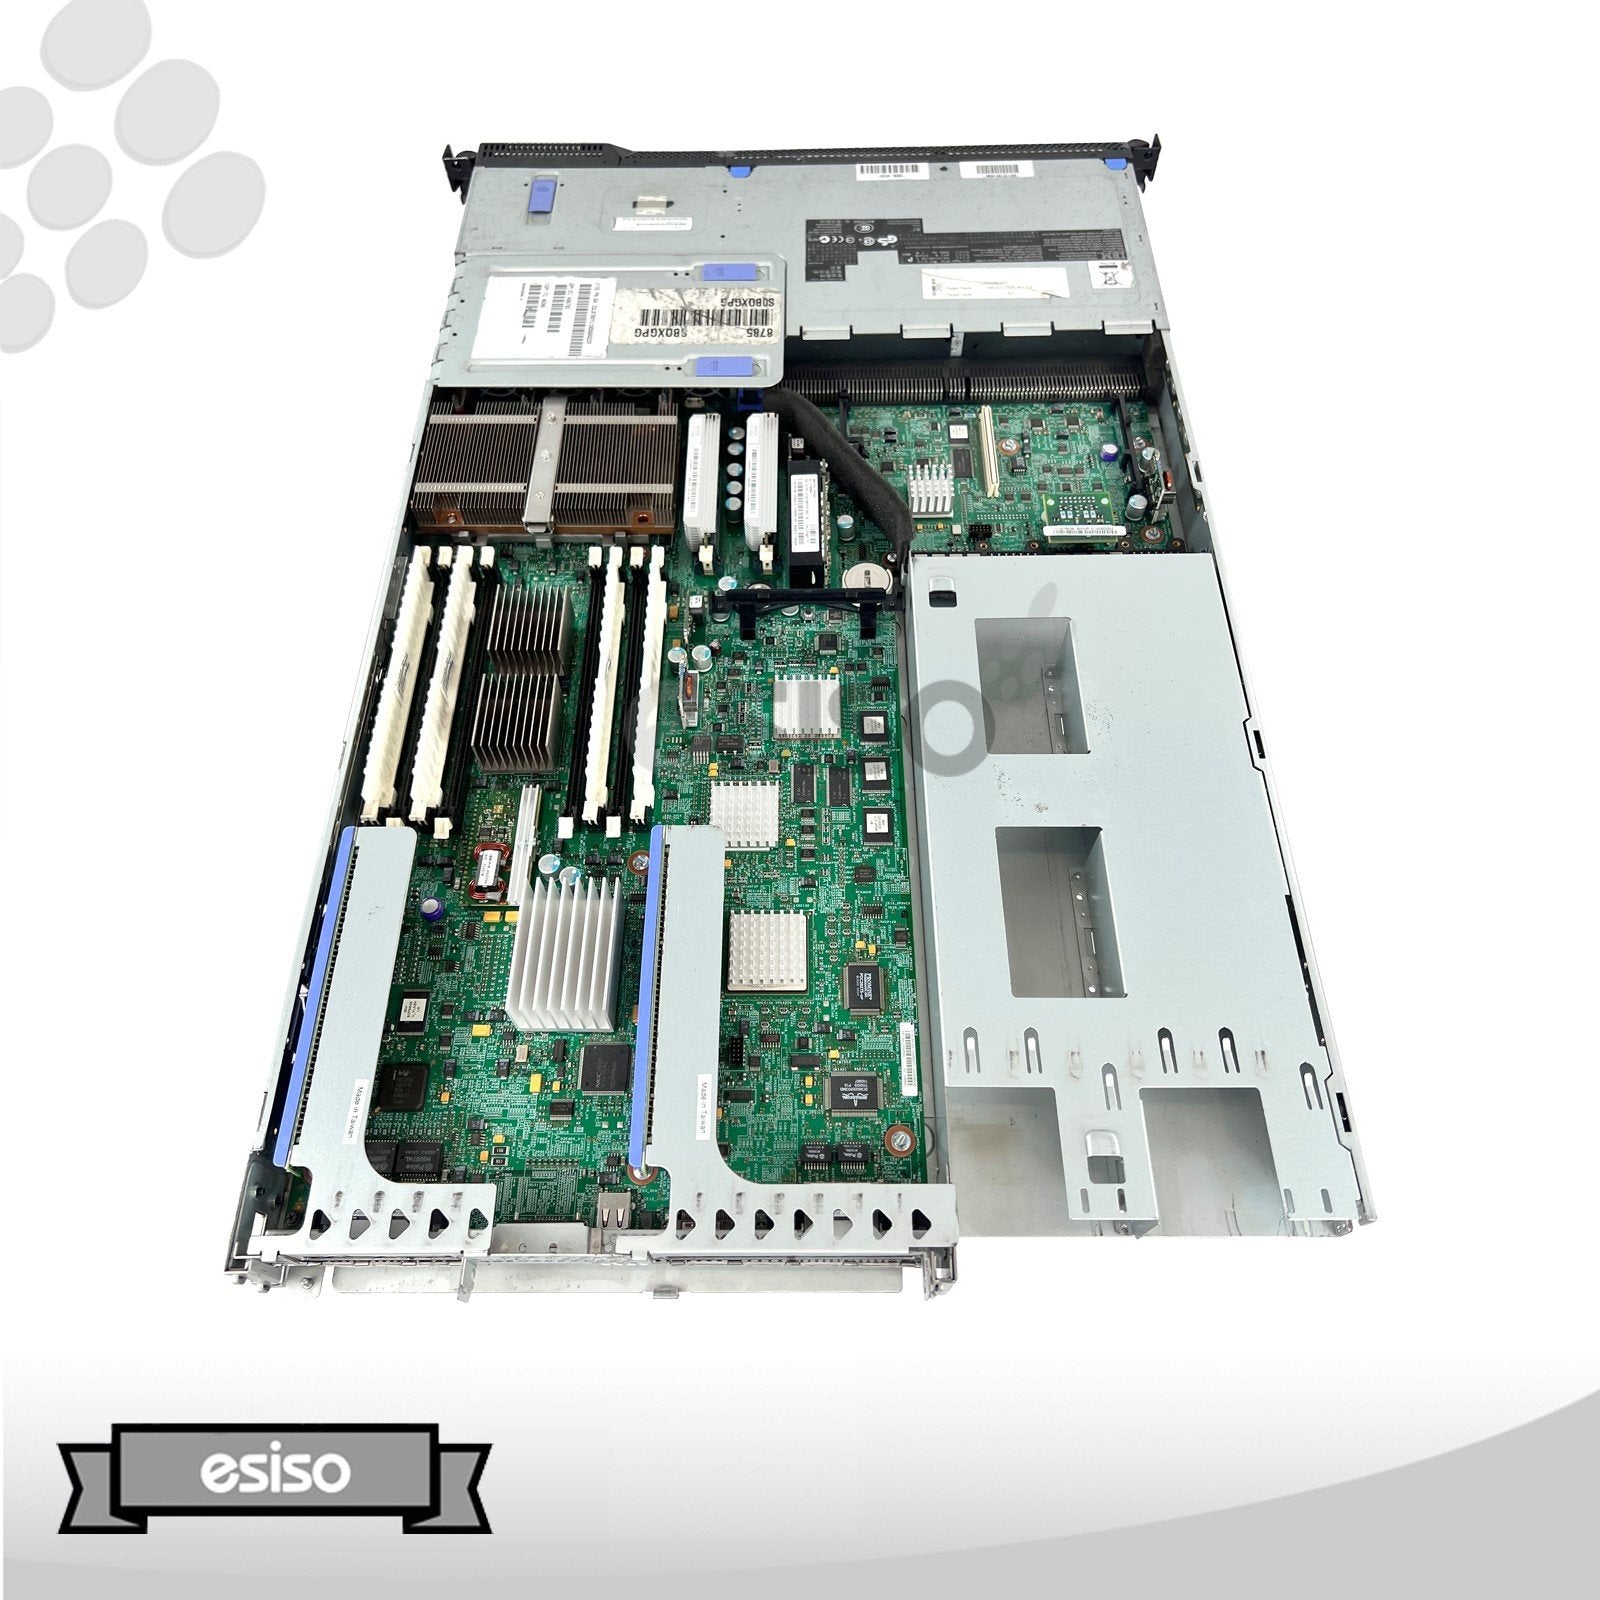 LENOVO 9115-505 P SERIES 2LFF WITH 03N6562 SYSTEMBOARD ONLY